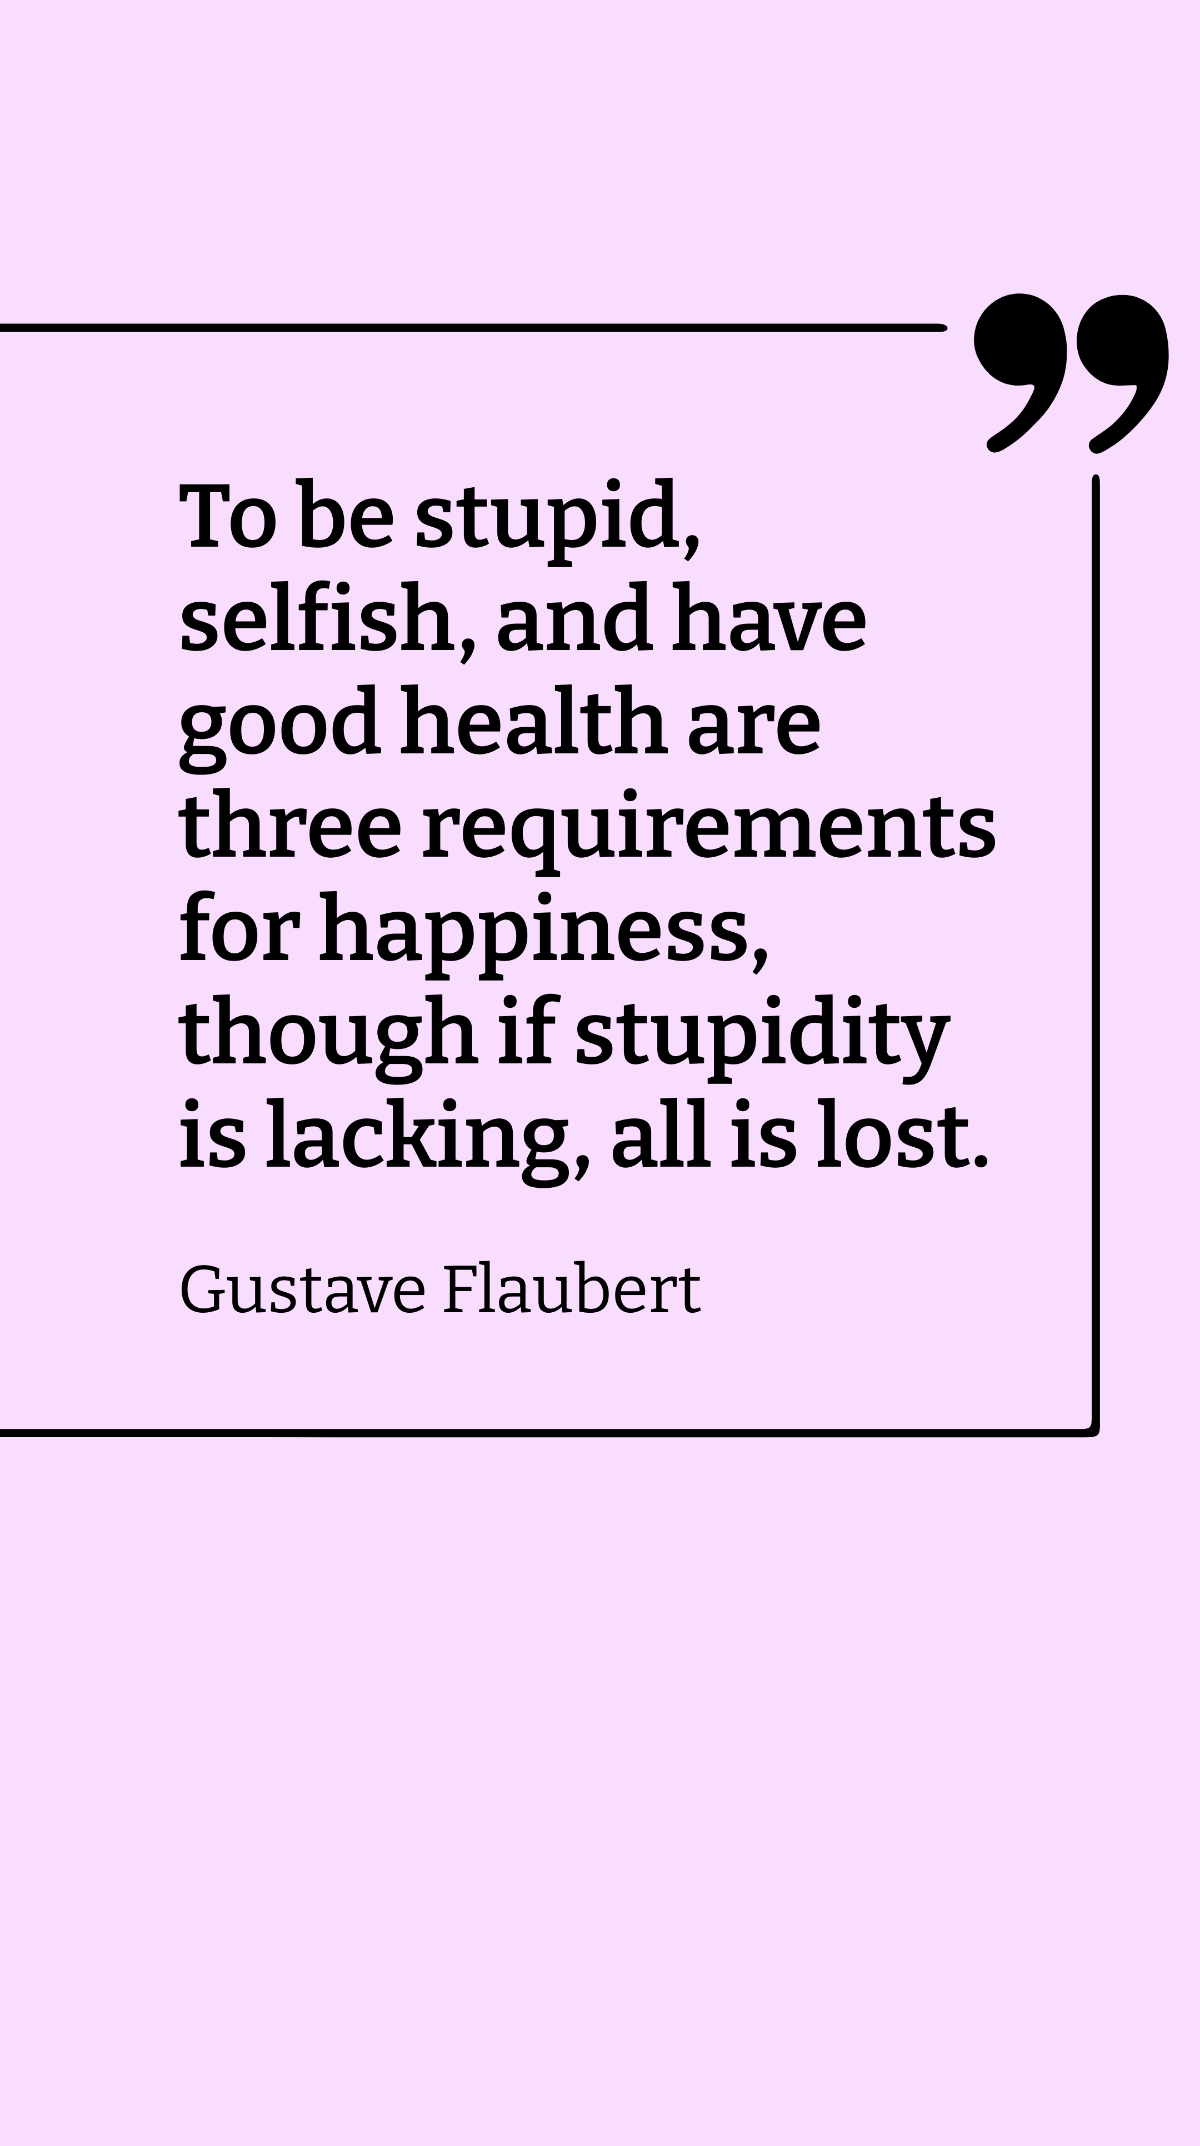 Gustave Flaubert - To be stupid, selfish, and have good health are three requirements for happiness, though if stupidity is lacking, all is lost. Template